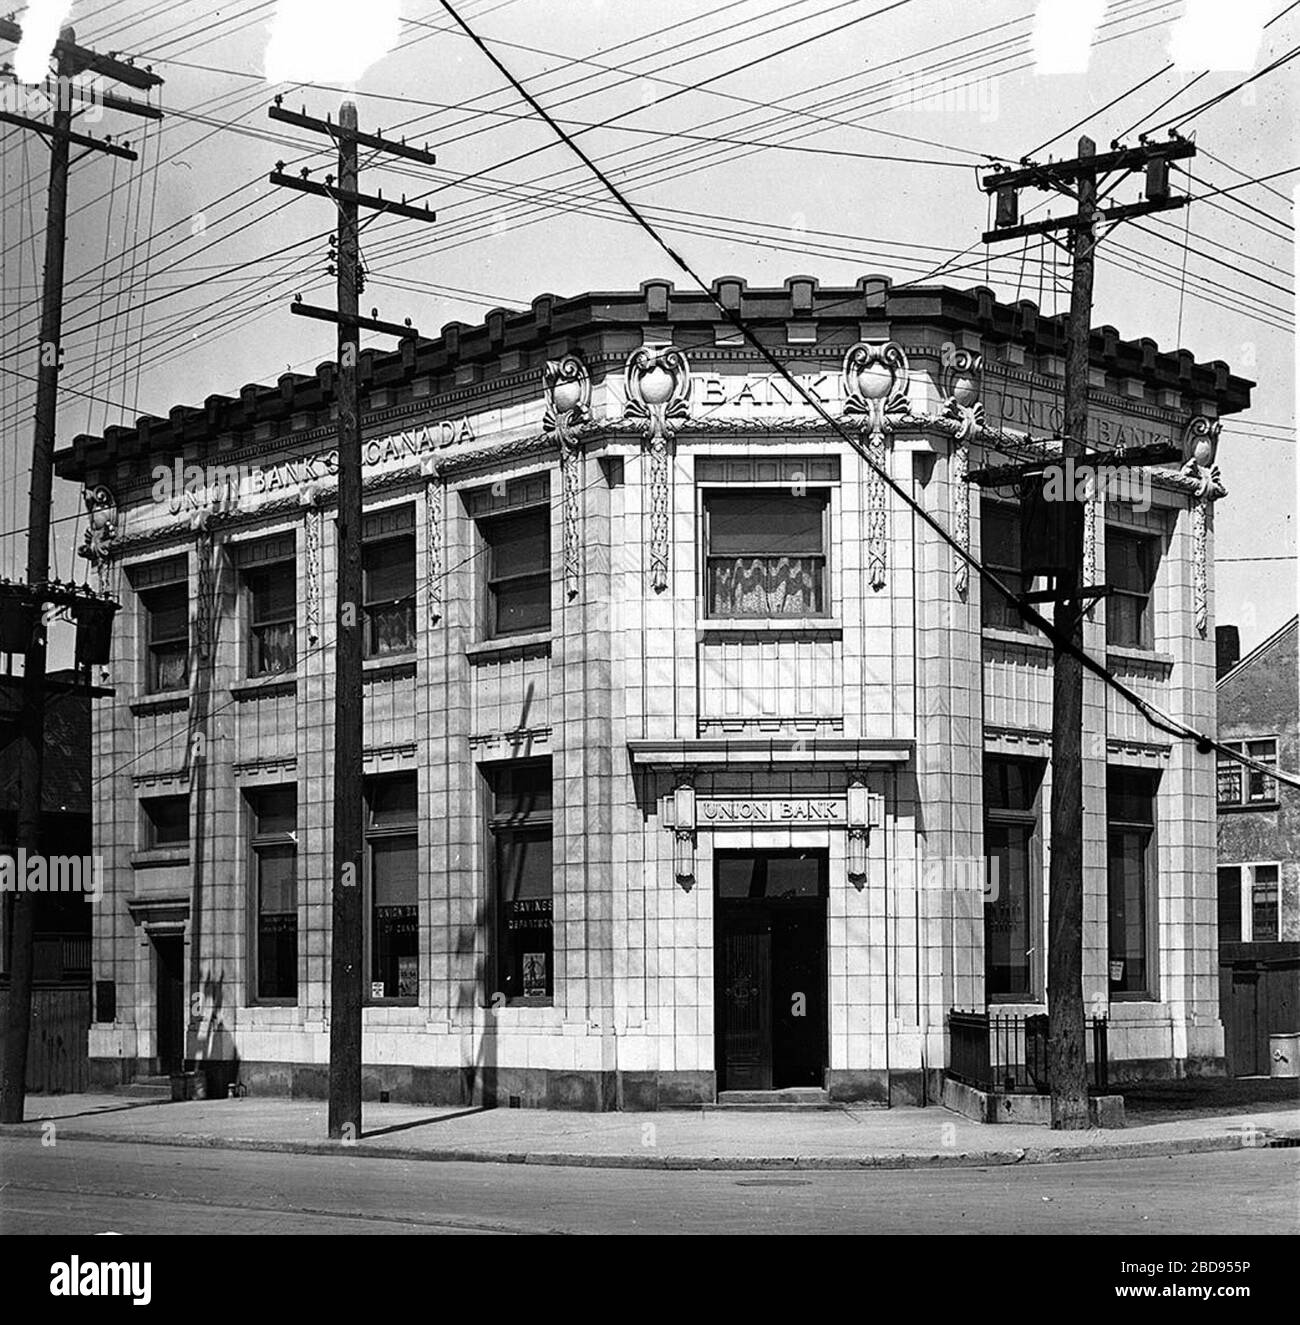 English Union Bank On The Northwest Corner Of Danforth And Pape Avenues Shortly After Completion Of This Branch The Union Bank Of Canada Merged With The Royal Bank Of Canada In 1925